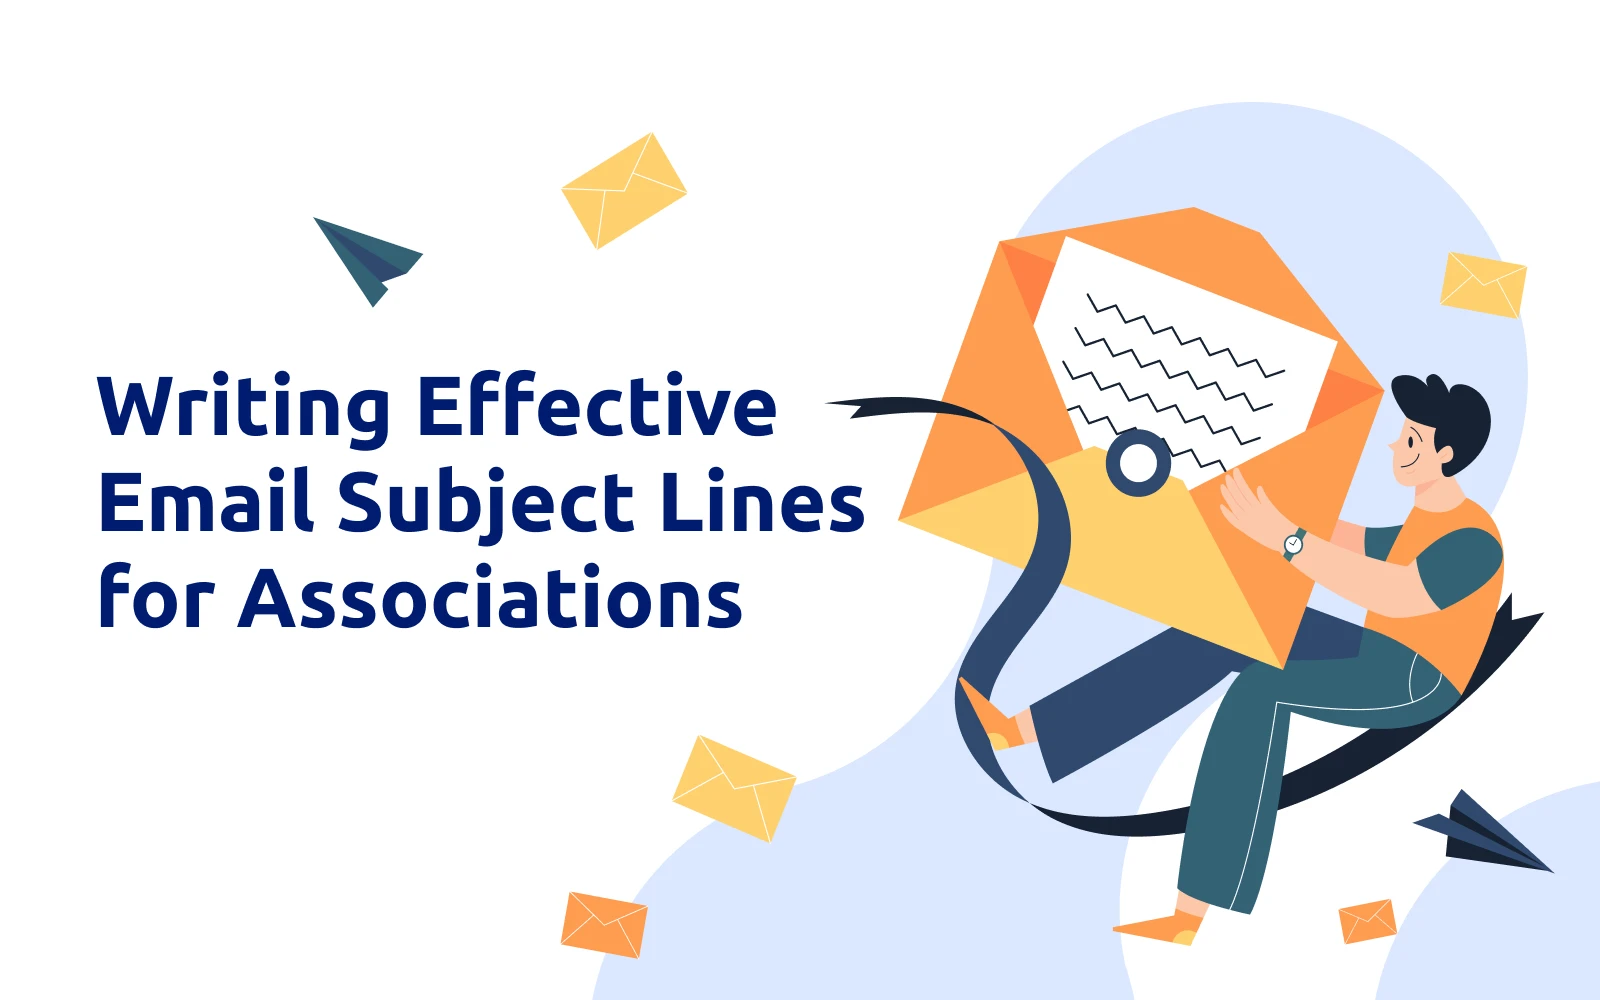 Writing Effective Email Subject Lines for Associations